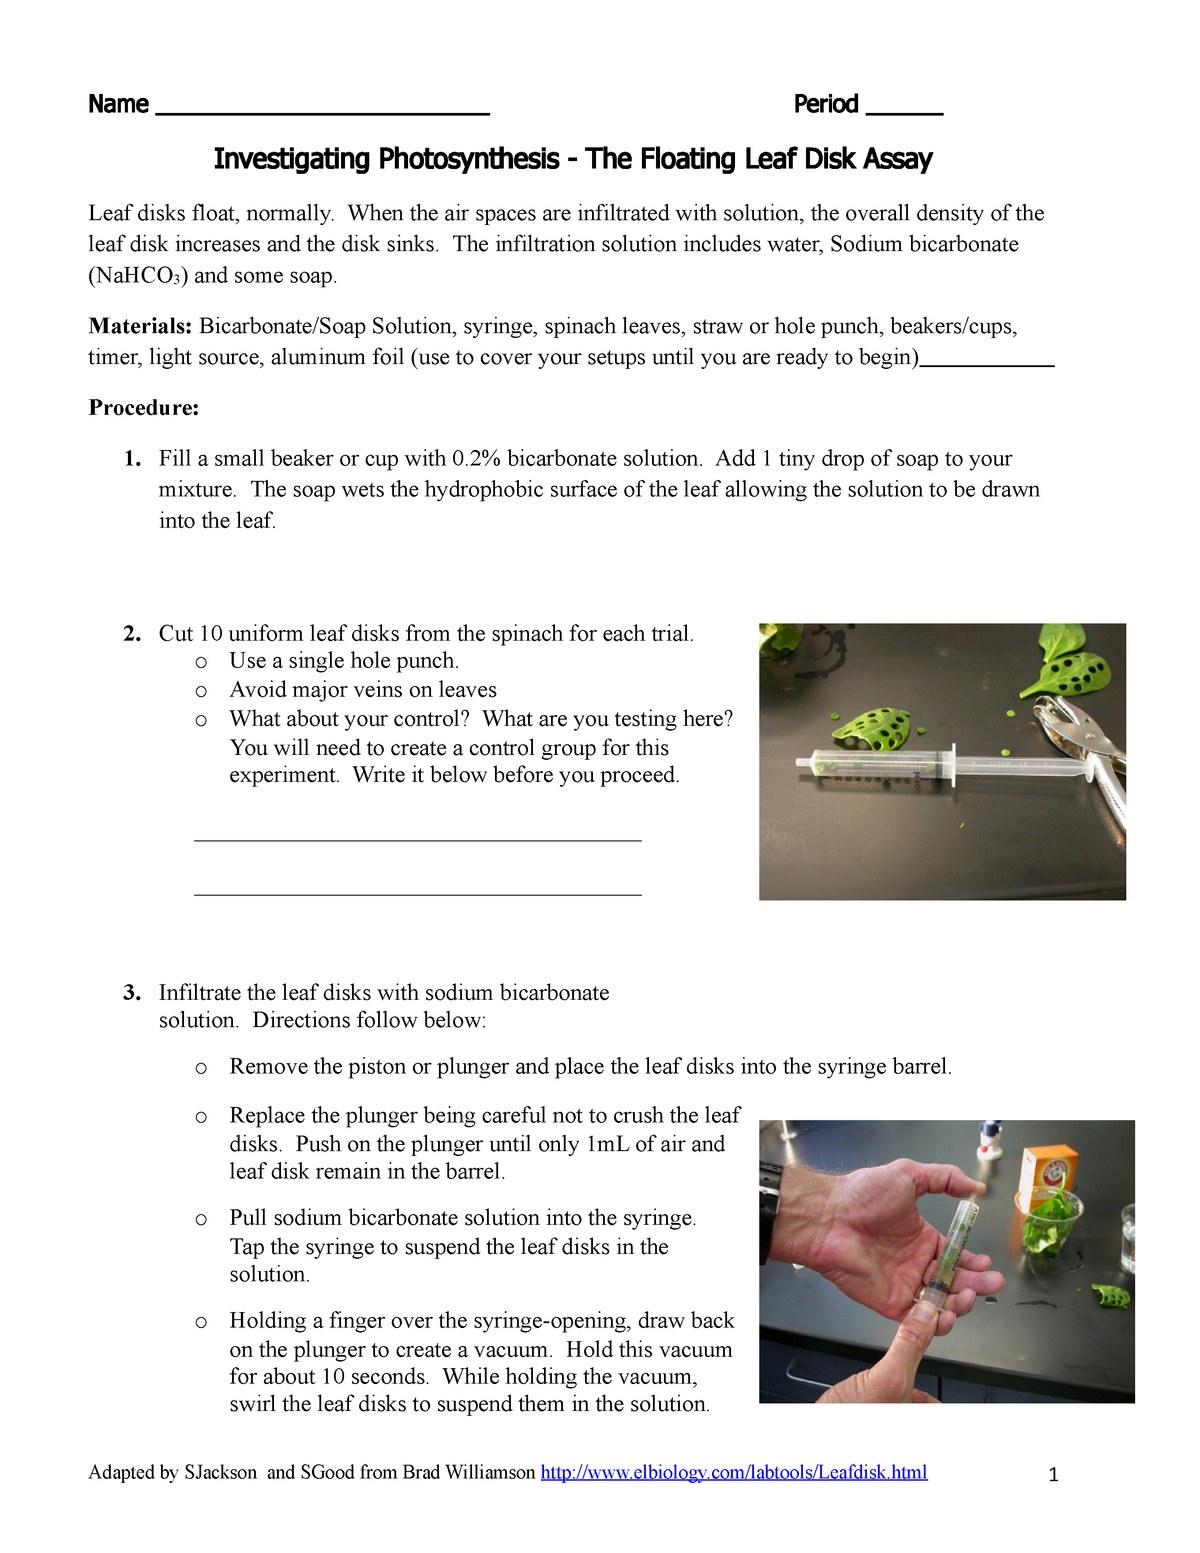 analysis of effect of herbicide on photosynthesis lab report